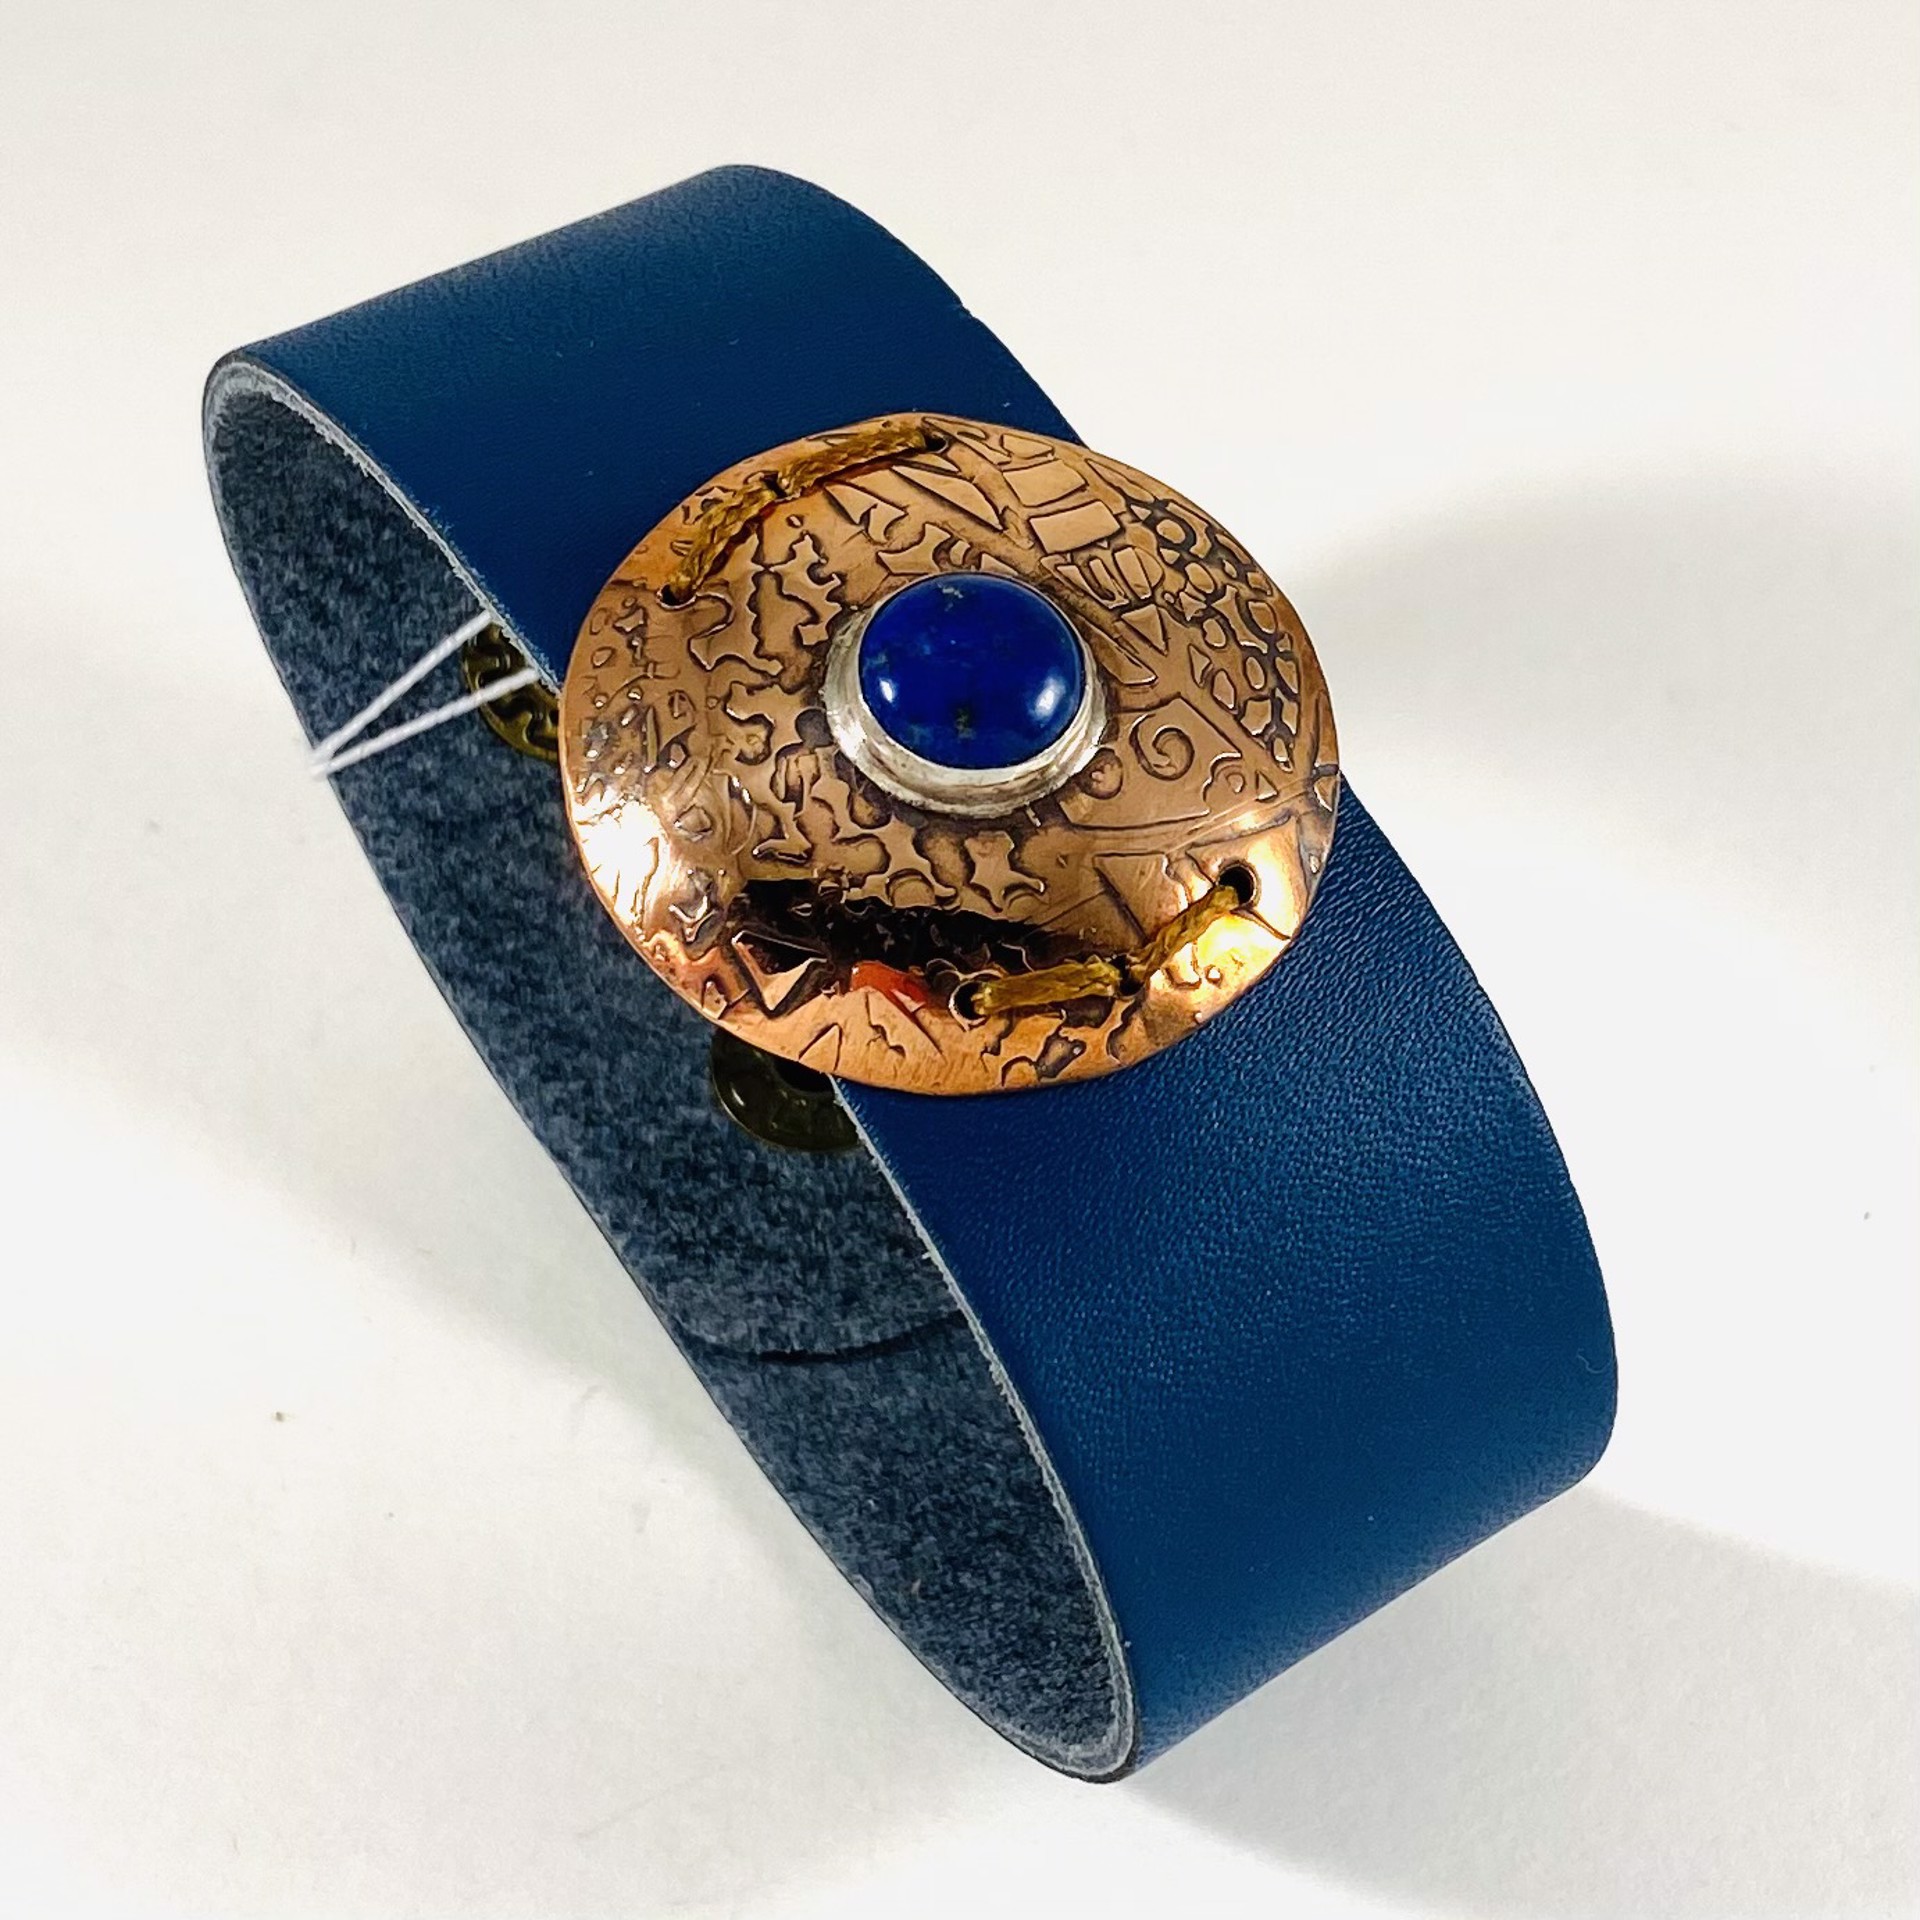 Lapis and Copper on Leather Cuff Bracelet AB21-38 by Anne Bivens